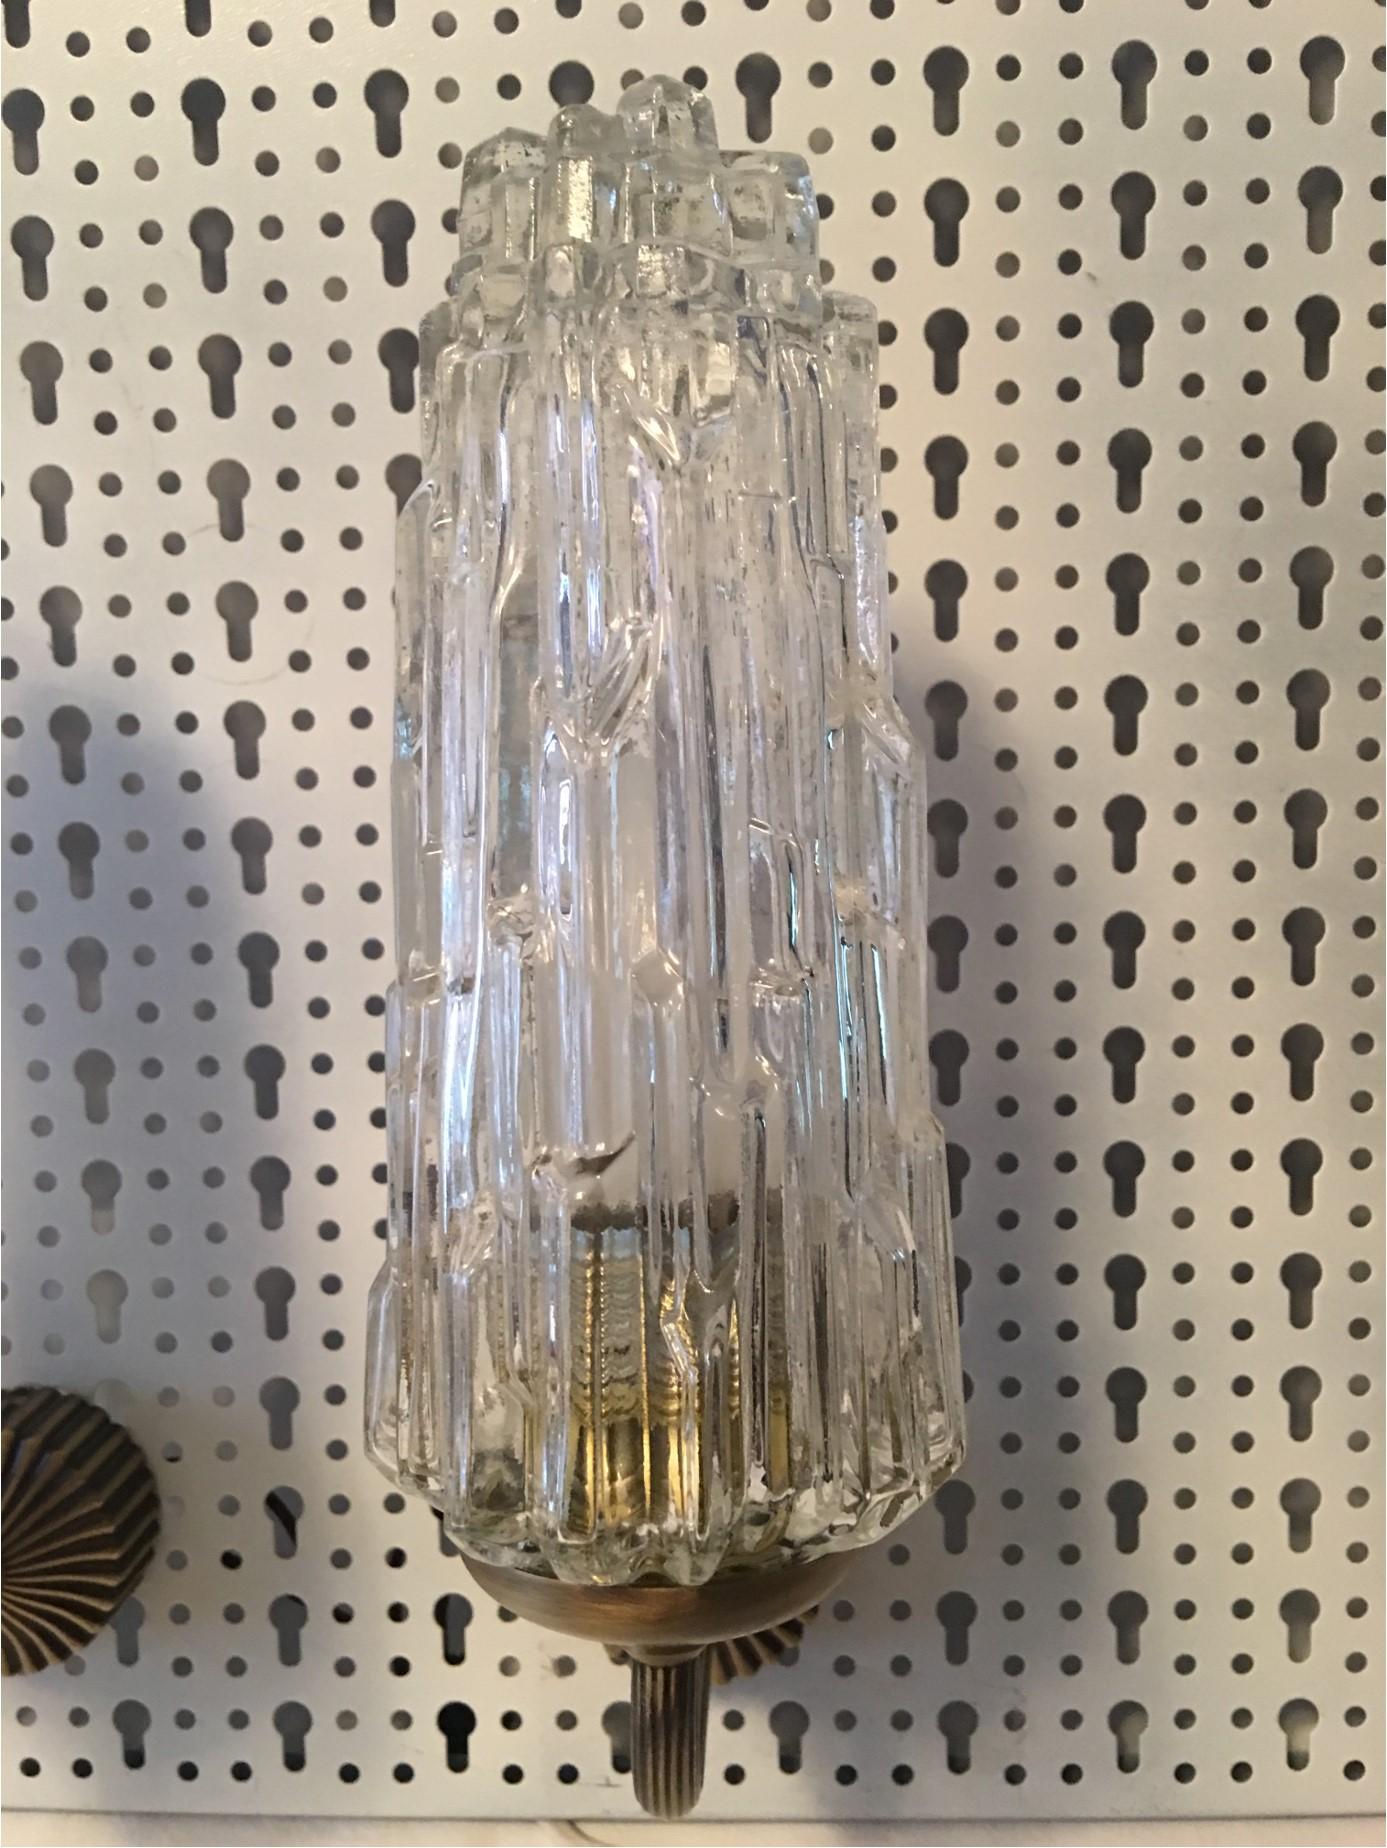 Charming pair of French 1970s brass and glass Art Deco style sconces. The delicate copper support stem gives an appearance of floating light fixtures. The wall attachment measures 2.25 inches. Each fixture requires one European E 14 Candelabra bulb